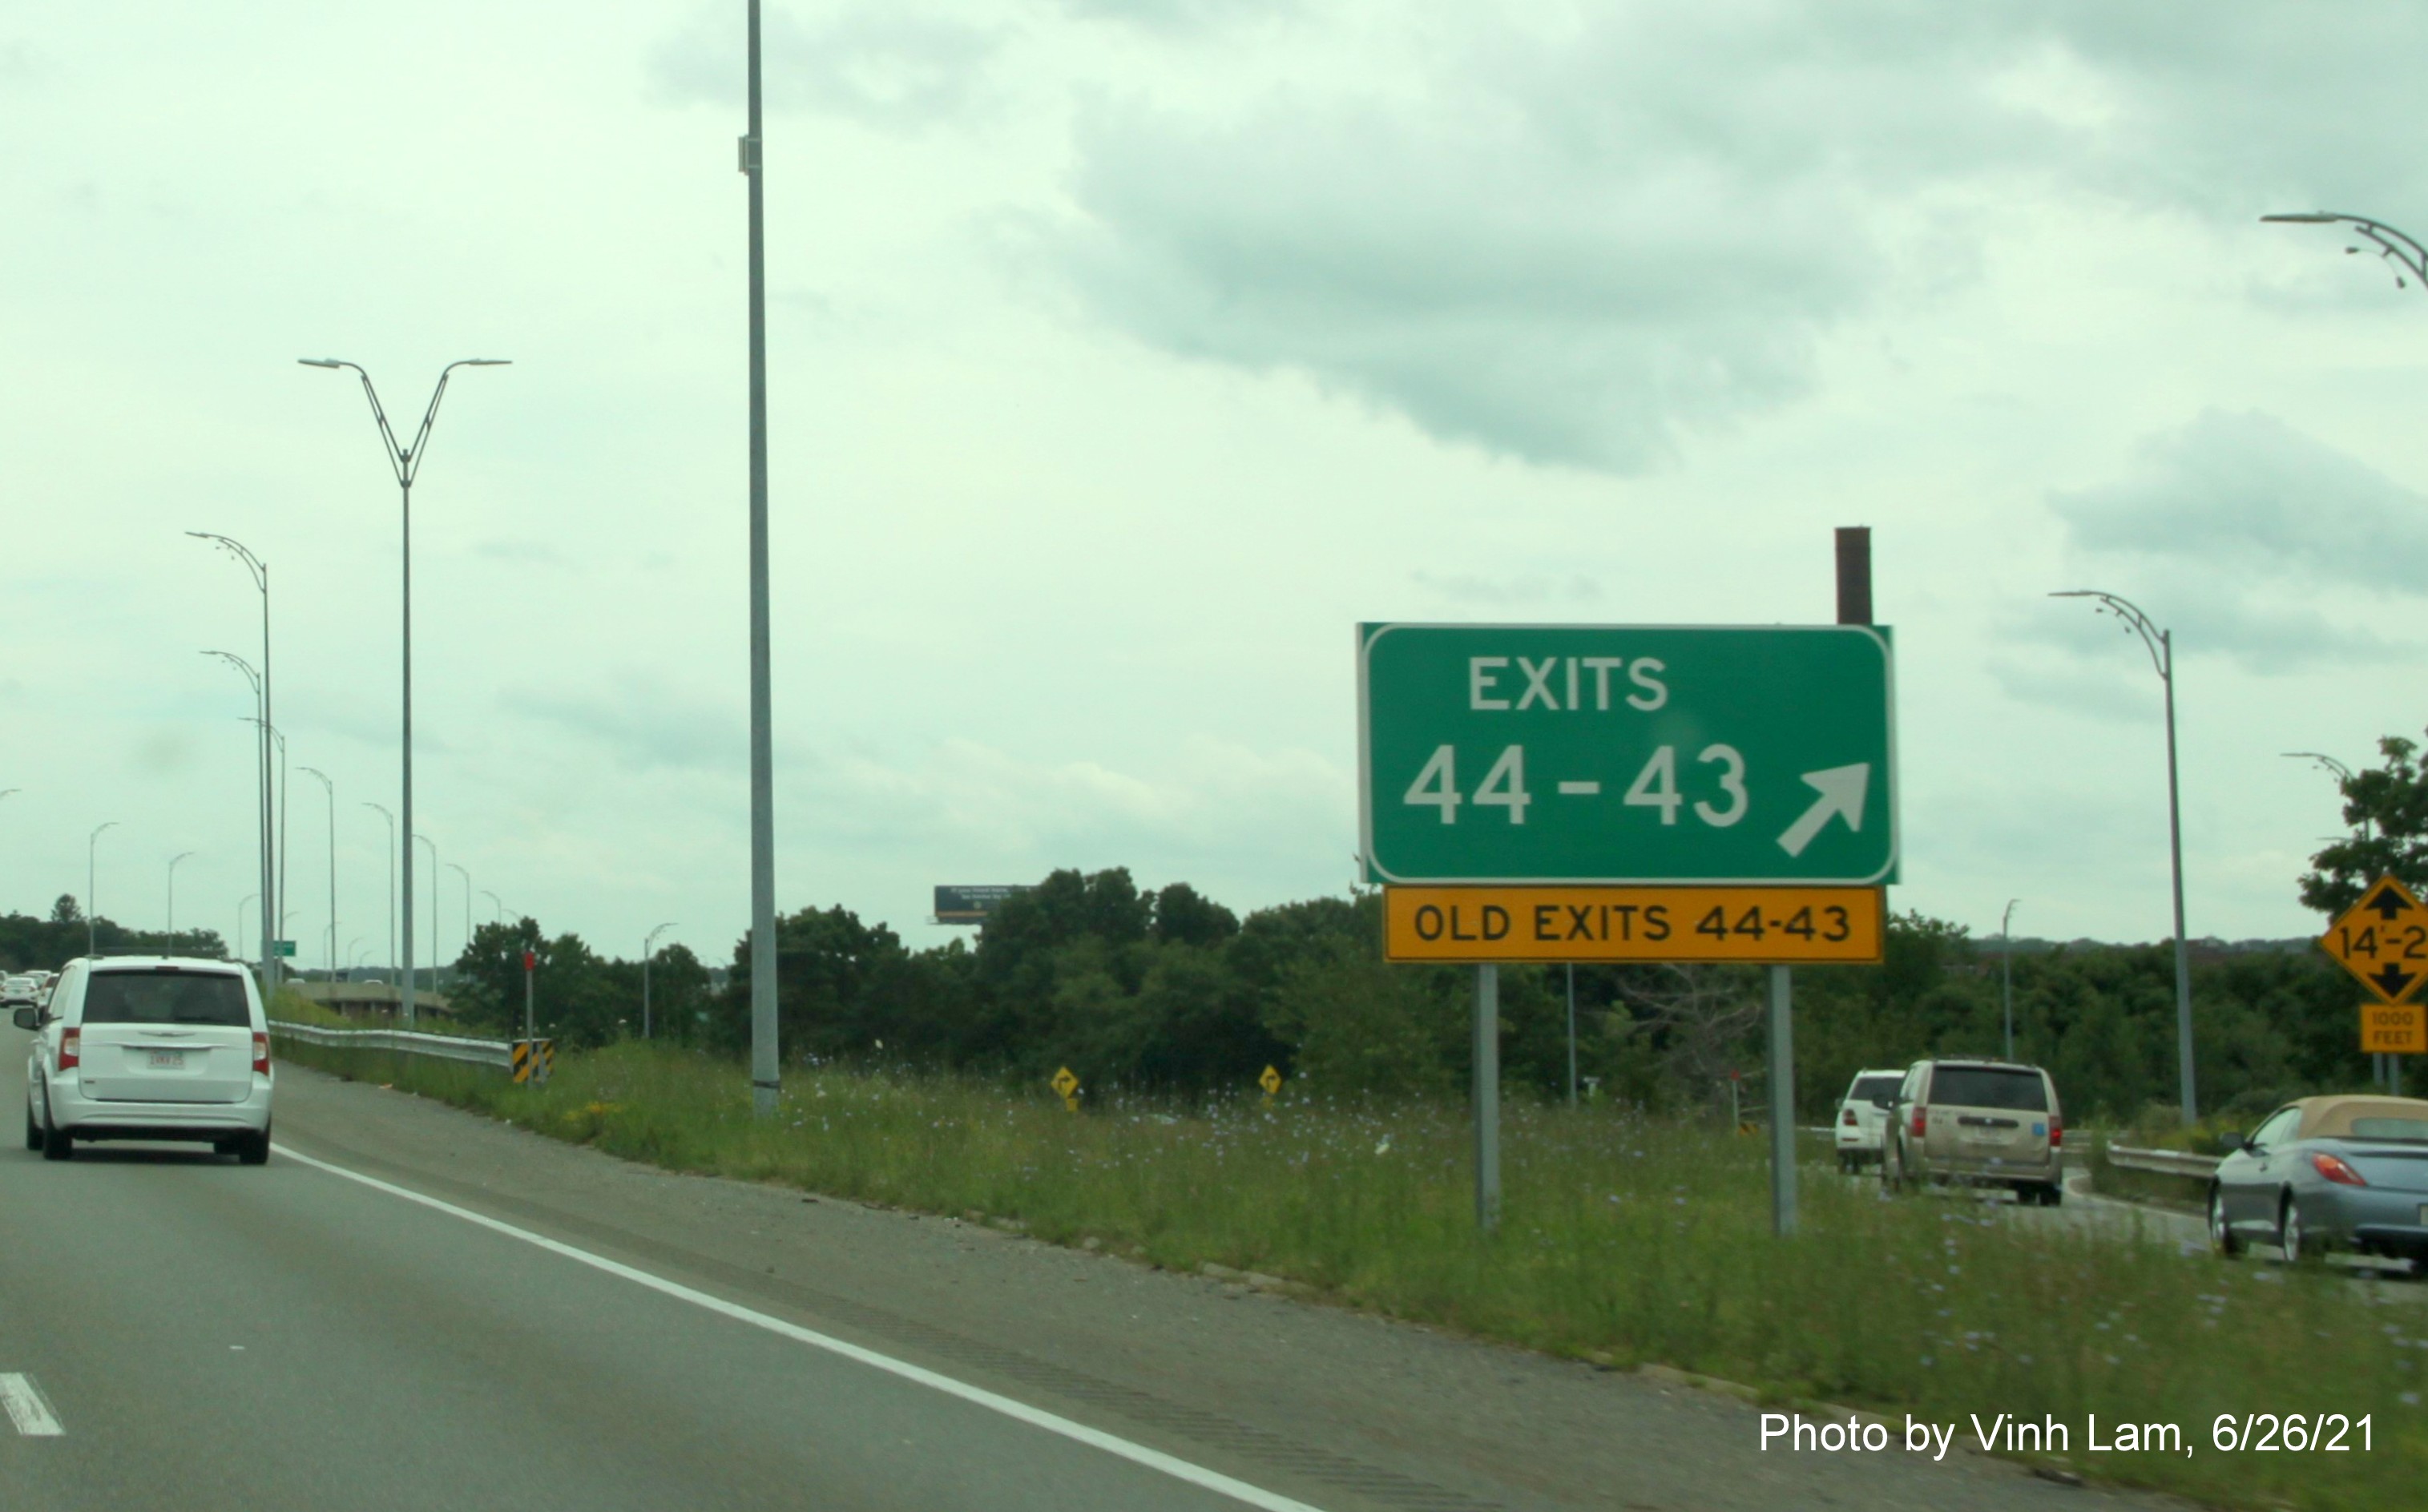 Image of gore sign for Merrimack Street and Mass. Avenue exits with old sequential exit numbers and yellow Old Exits 44-43 sign below on I-495 South in Lawrence, by Vinh Lam, June 2021